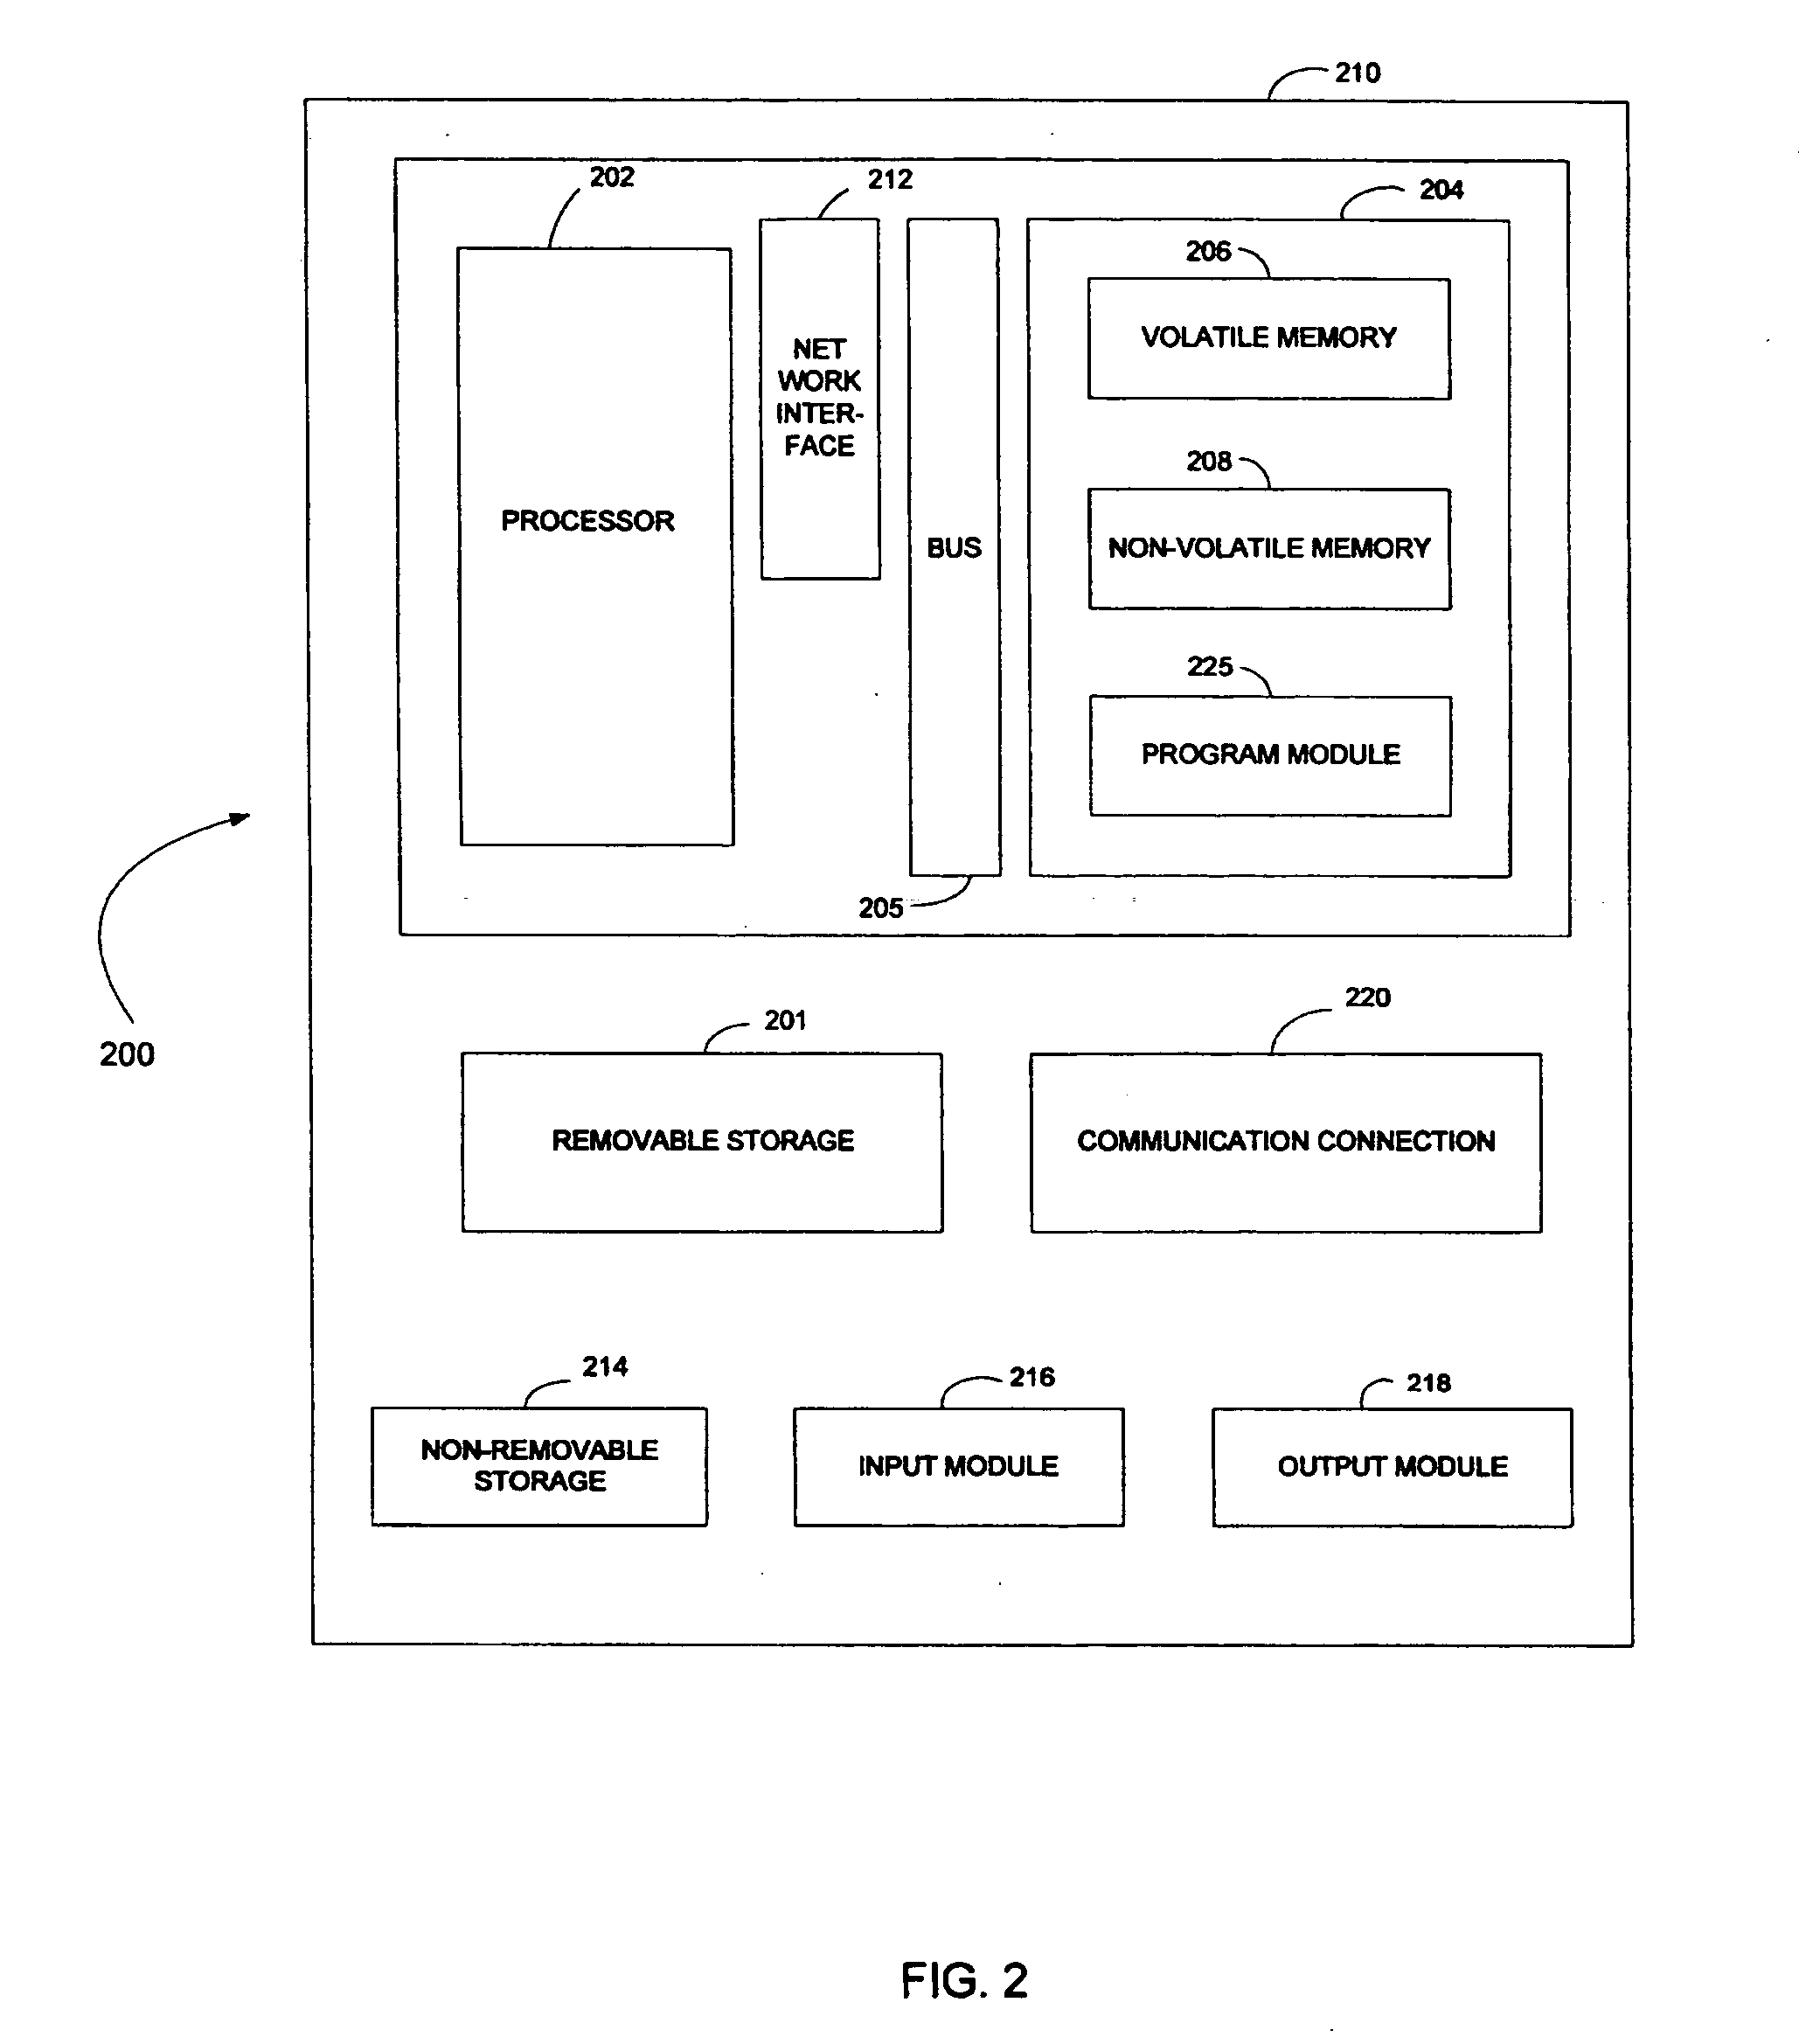 System and method to build a callgraph for functions with multiple entry points